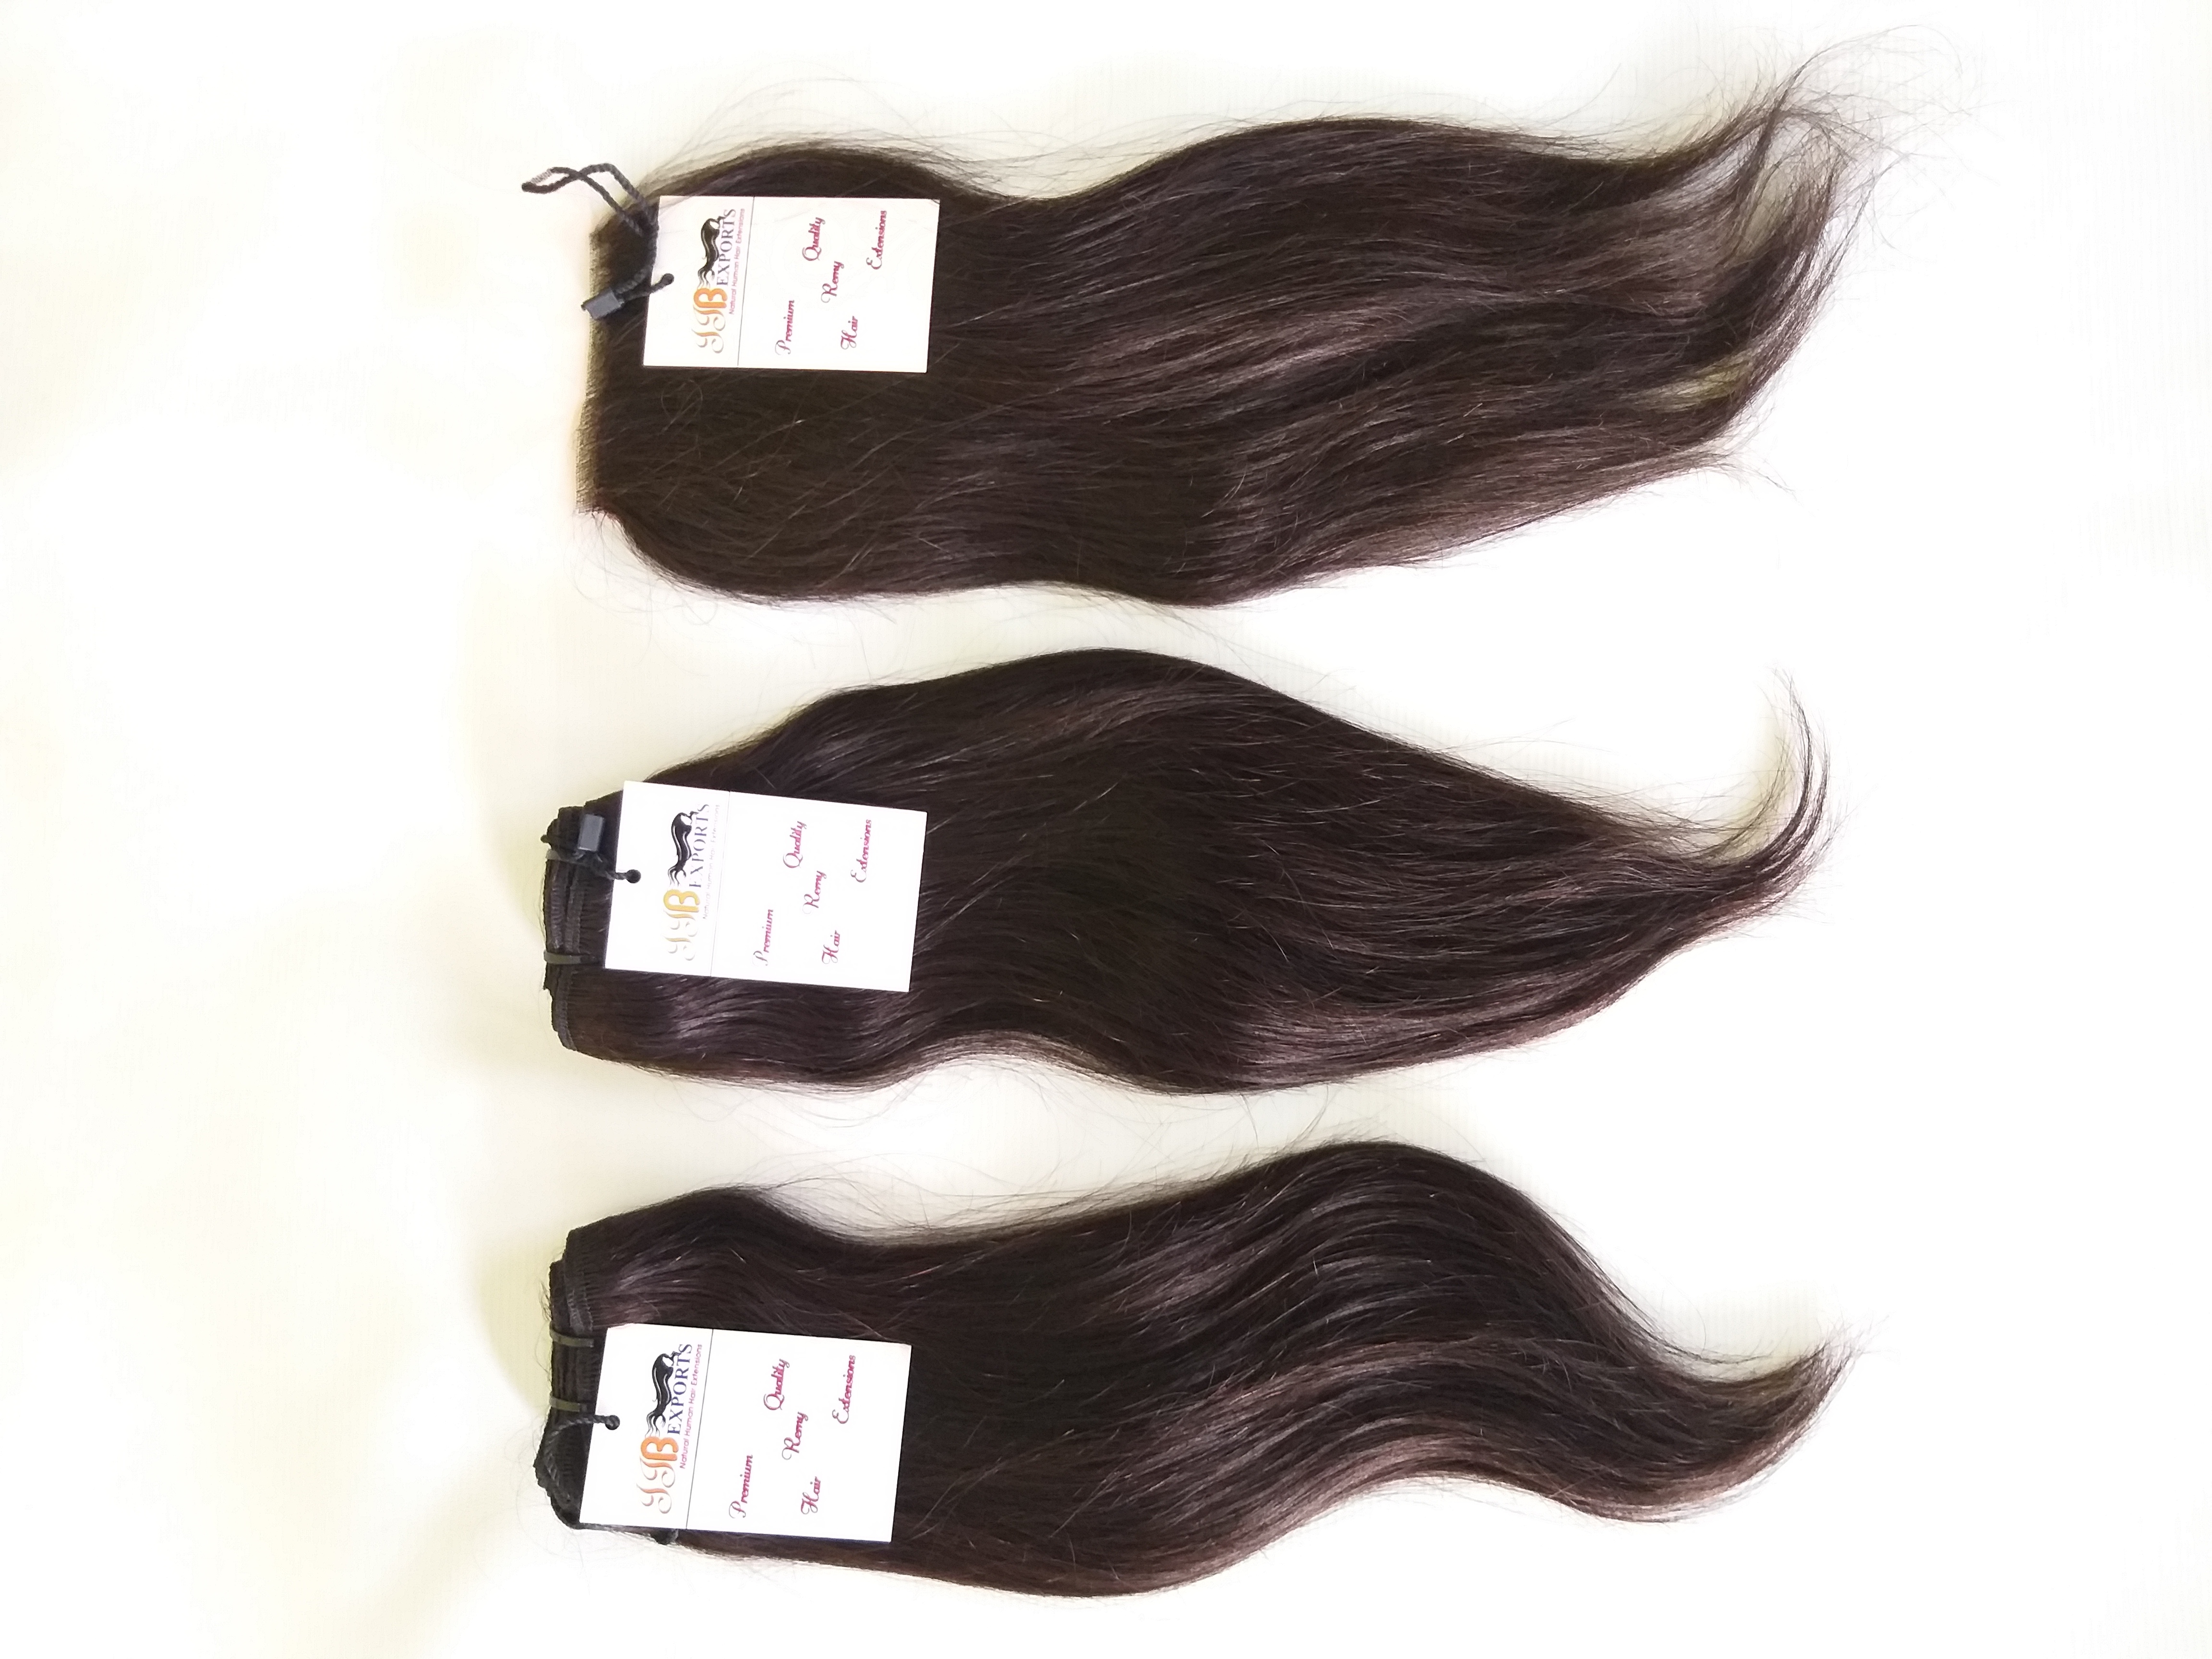 High quality raw indian virgin straight/curly/wavy/bodywave remy human hair extensions